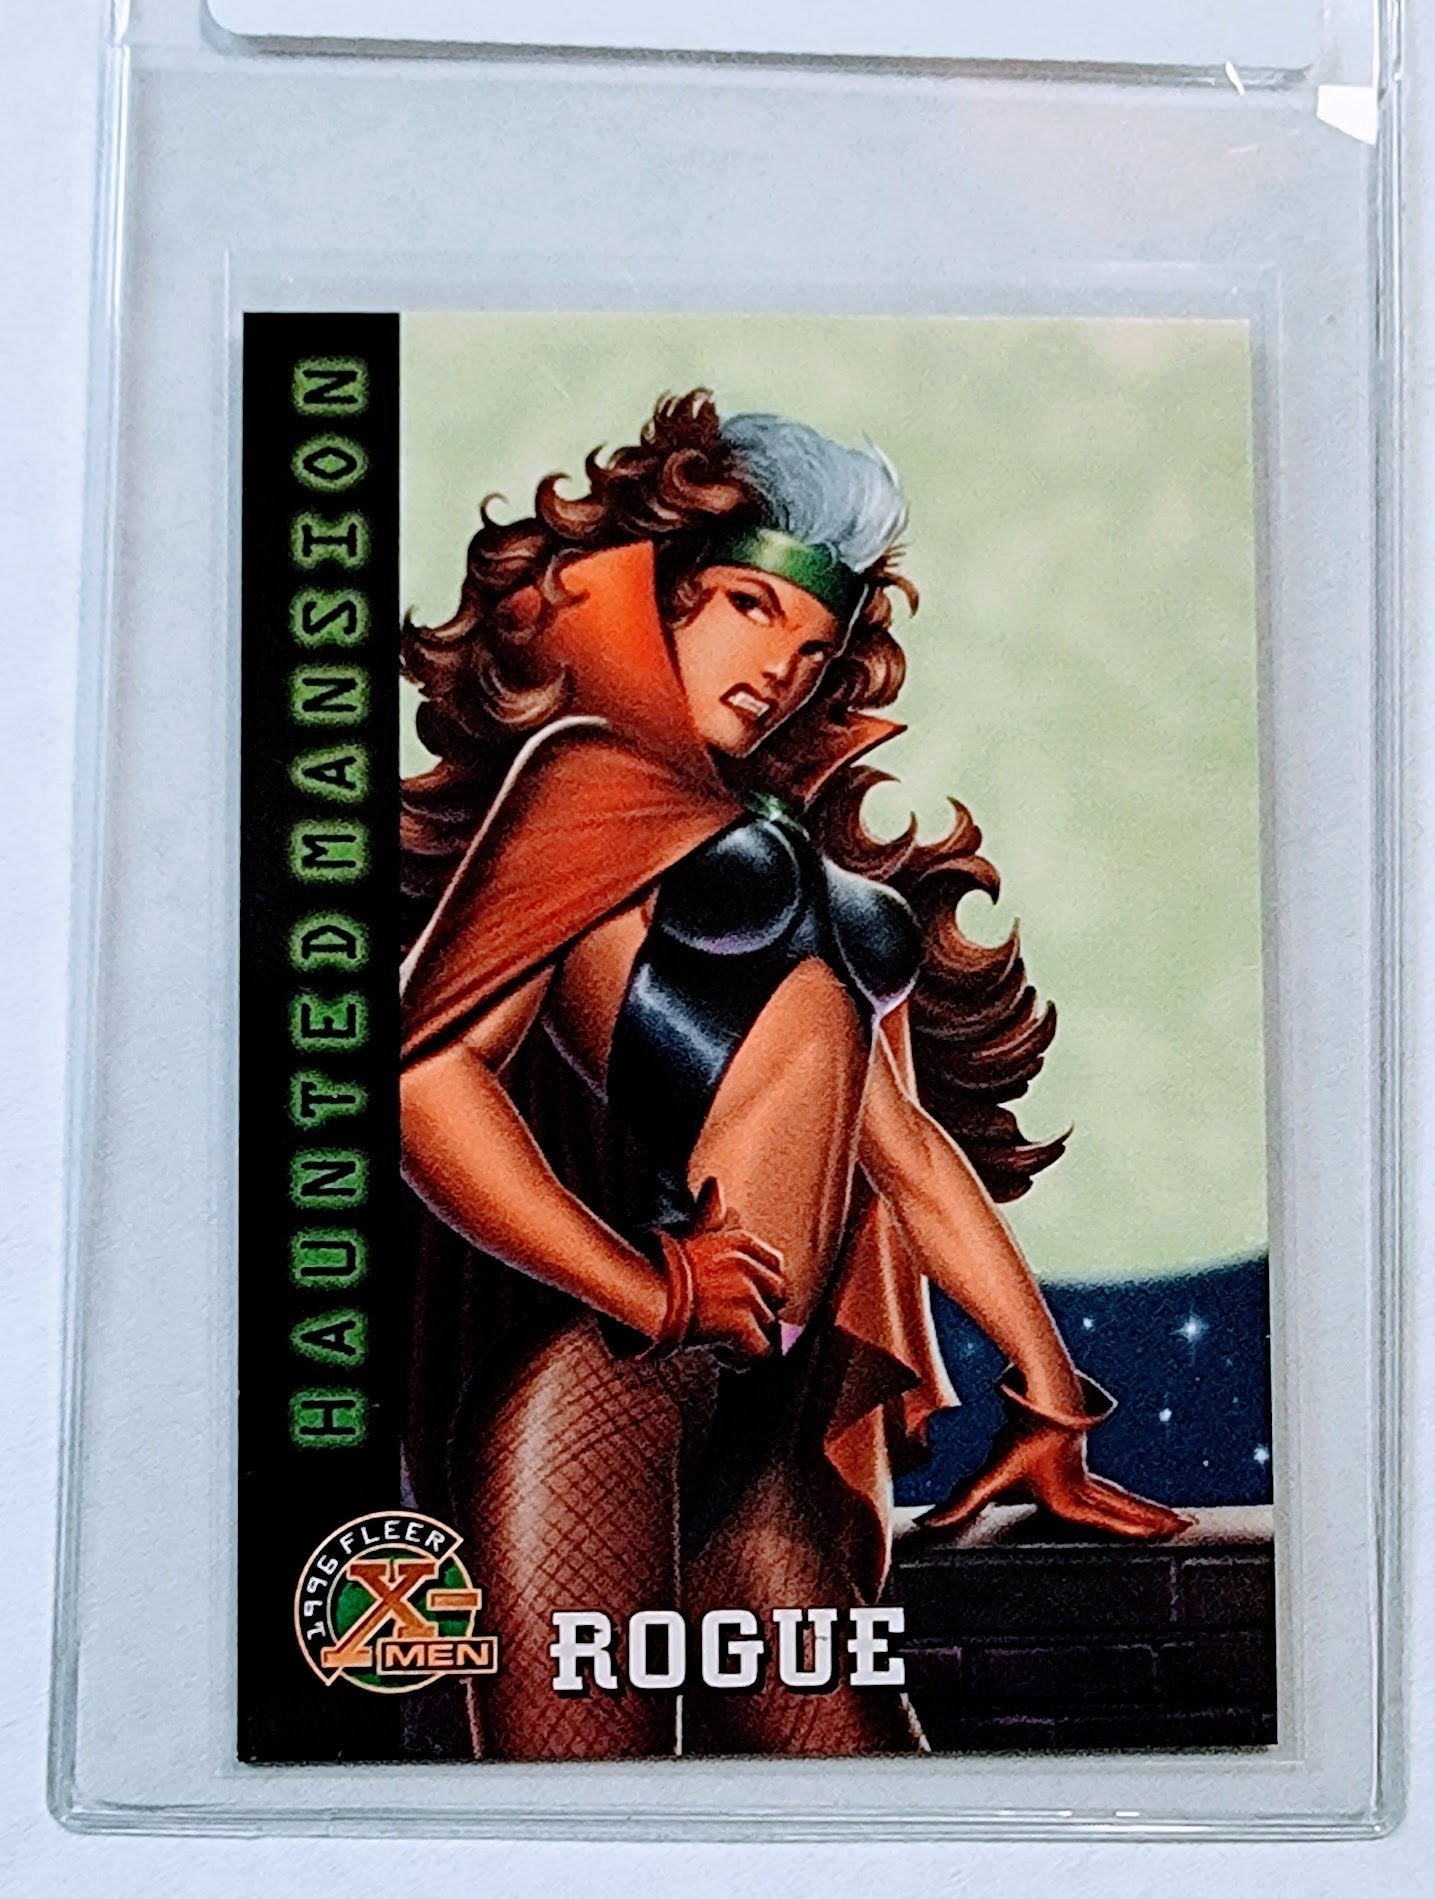 1996 Fleer X-Men Rogue Haunted Mansion Insert Marvel Trading Card VG/NM AVM1 simple Xclusive Collectibles   